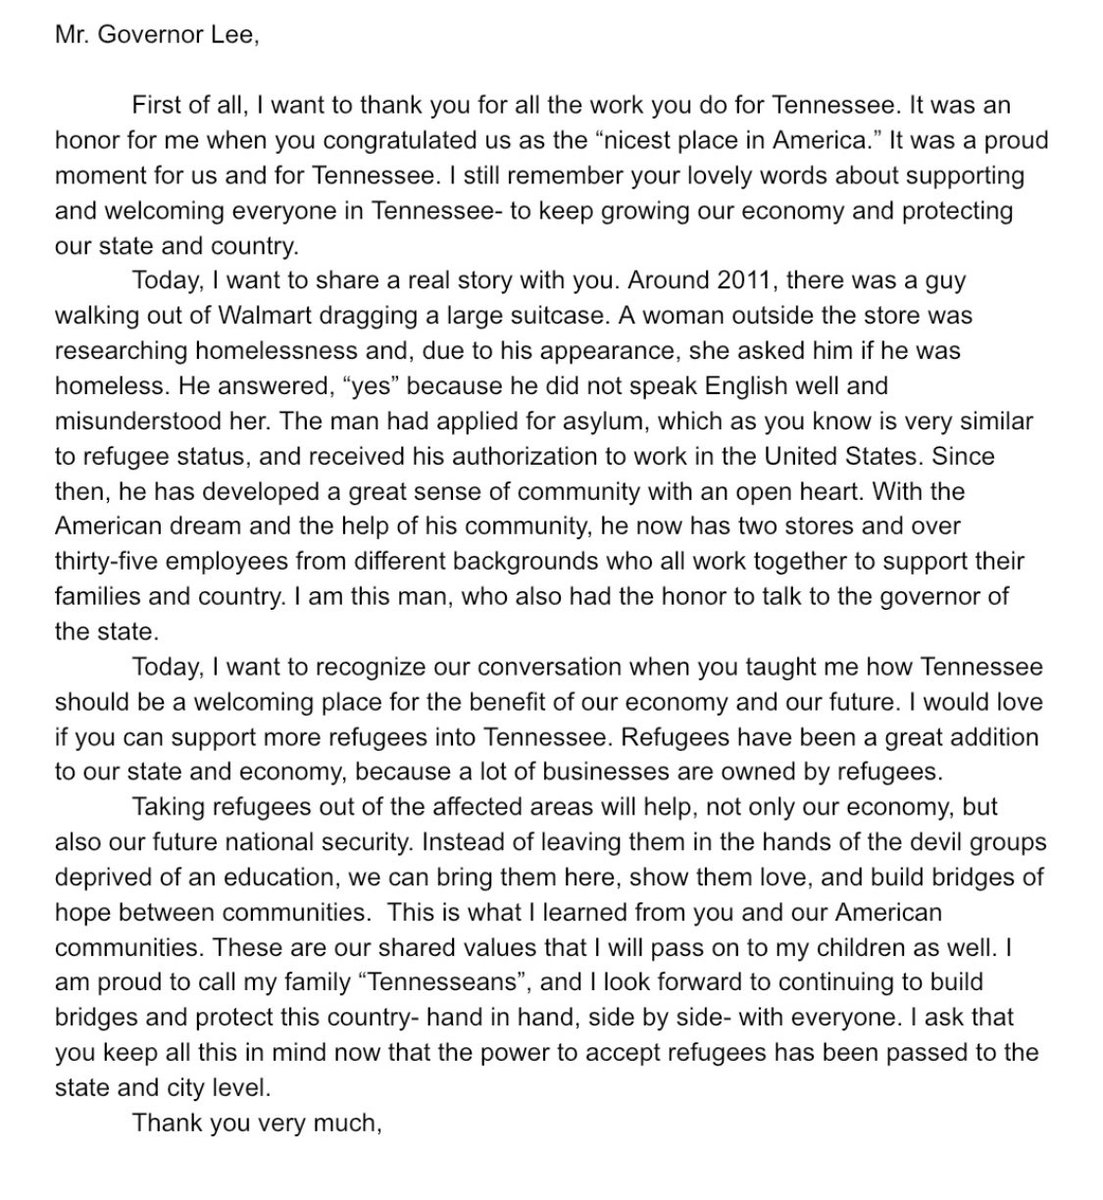 TN is home for me and other Families we have learned a lot from our community,We looking forward to keep building our state and country together, Build bridges between community,Please read me letter to @GovBillLee about keep accepting more refugees in TN retweet if you agree❤️🇺🇸